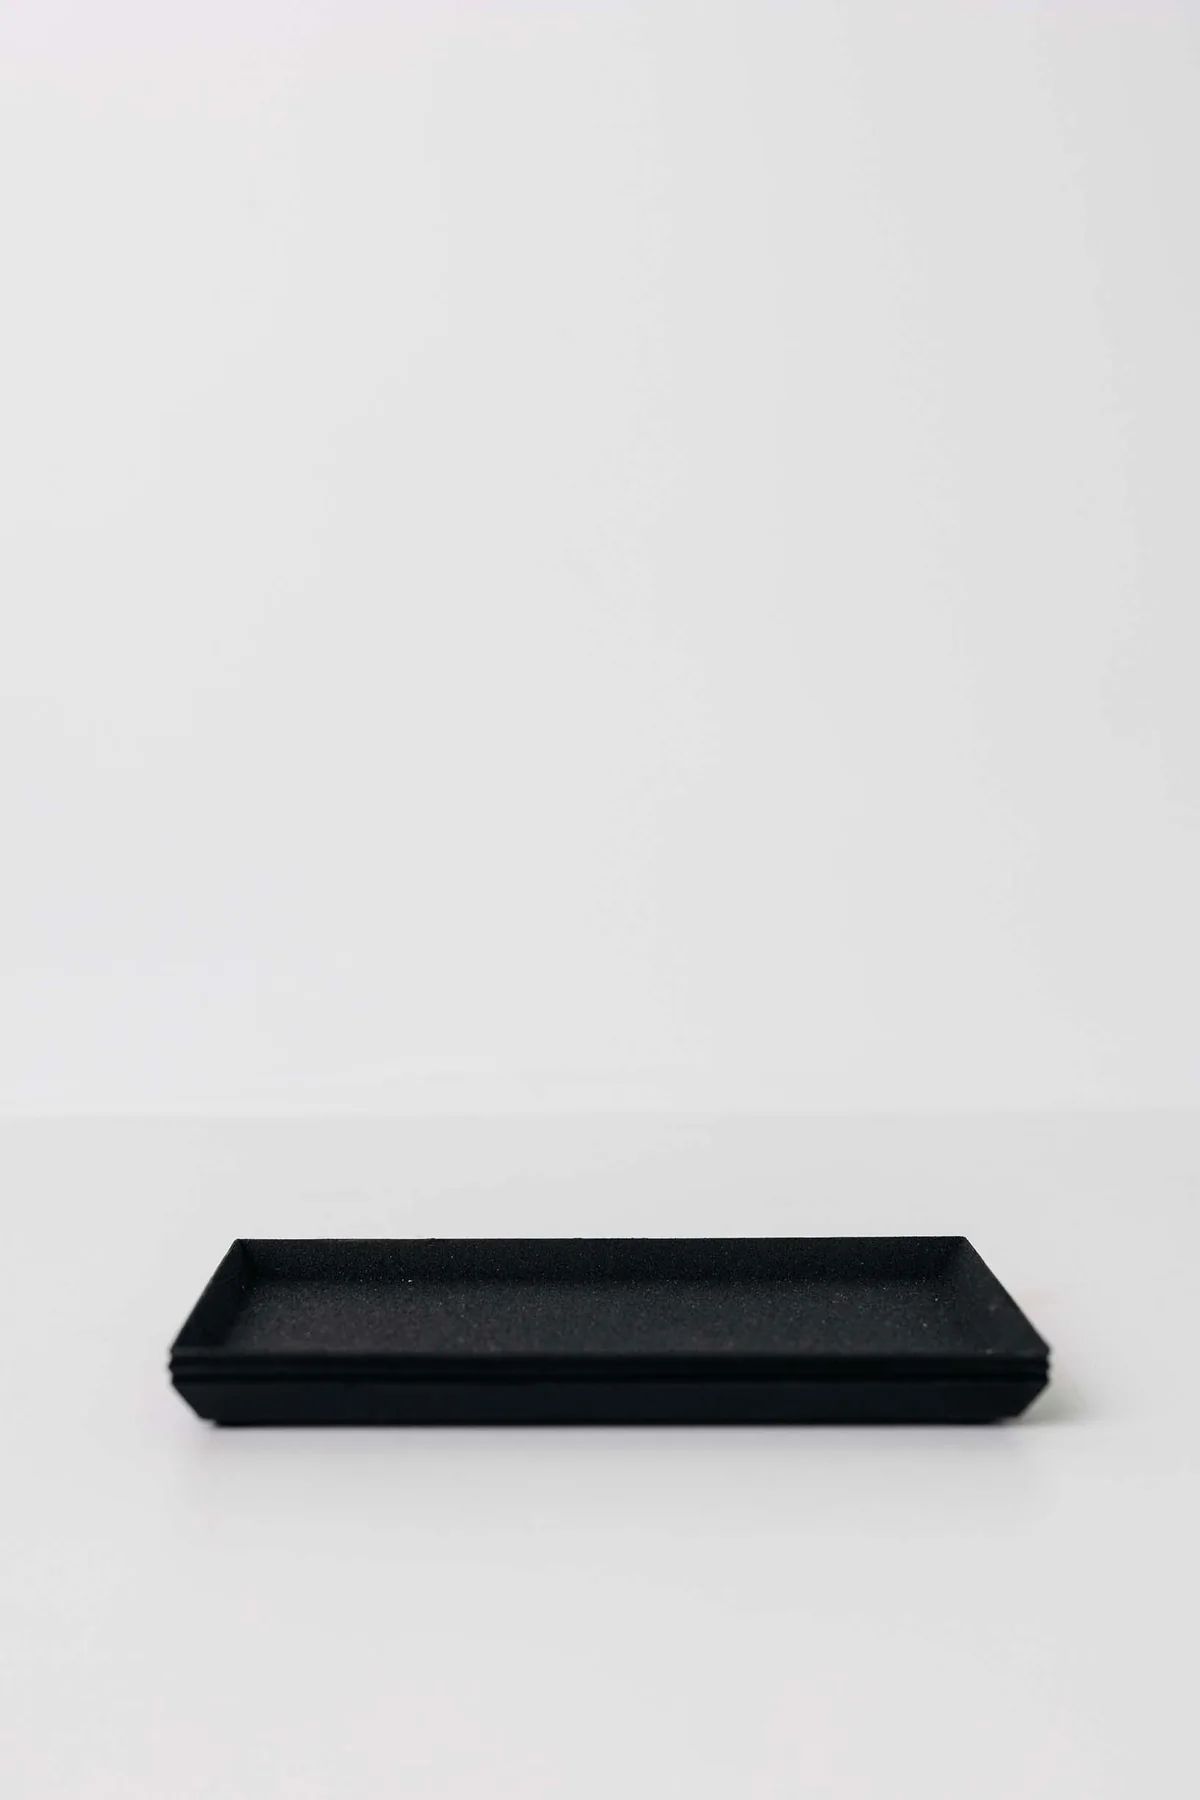 Shiv Metal Tray | THELIFESTYLEDCO